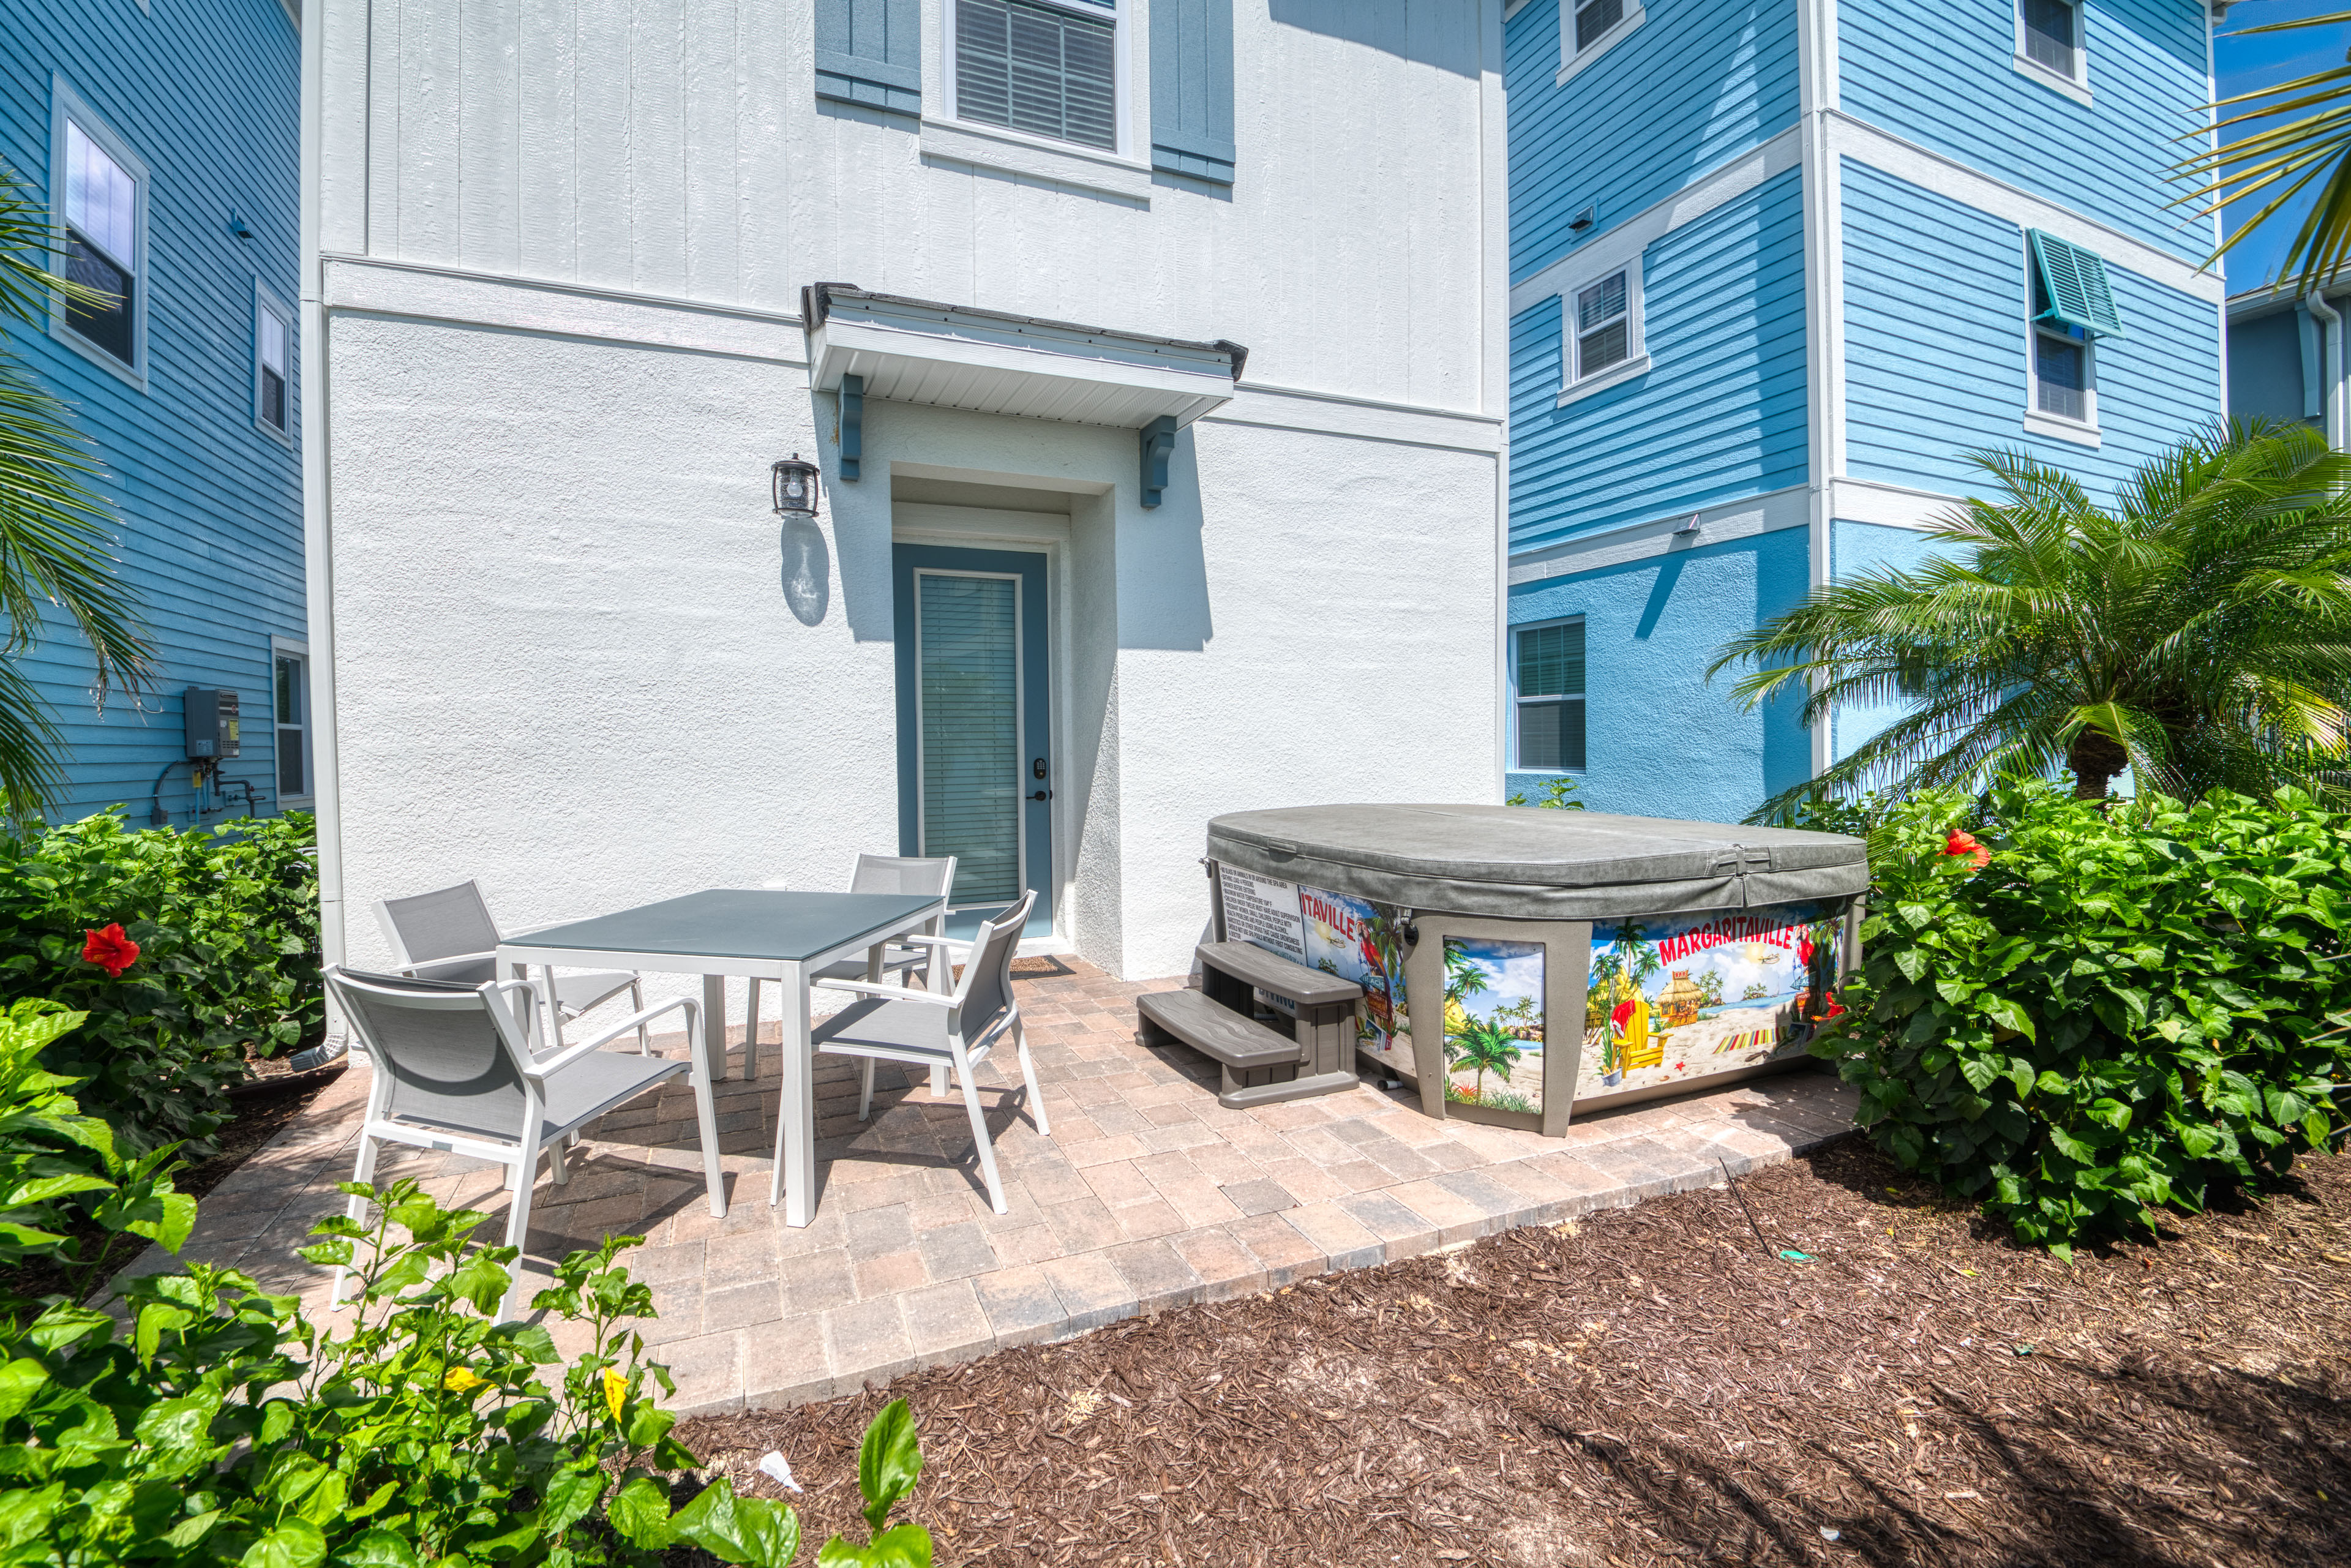 Property Image 2 - Nautical Cottage near Disney with Private Hot Tub & Margaritaville Resort Access - 3044SR